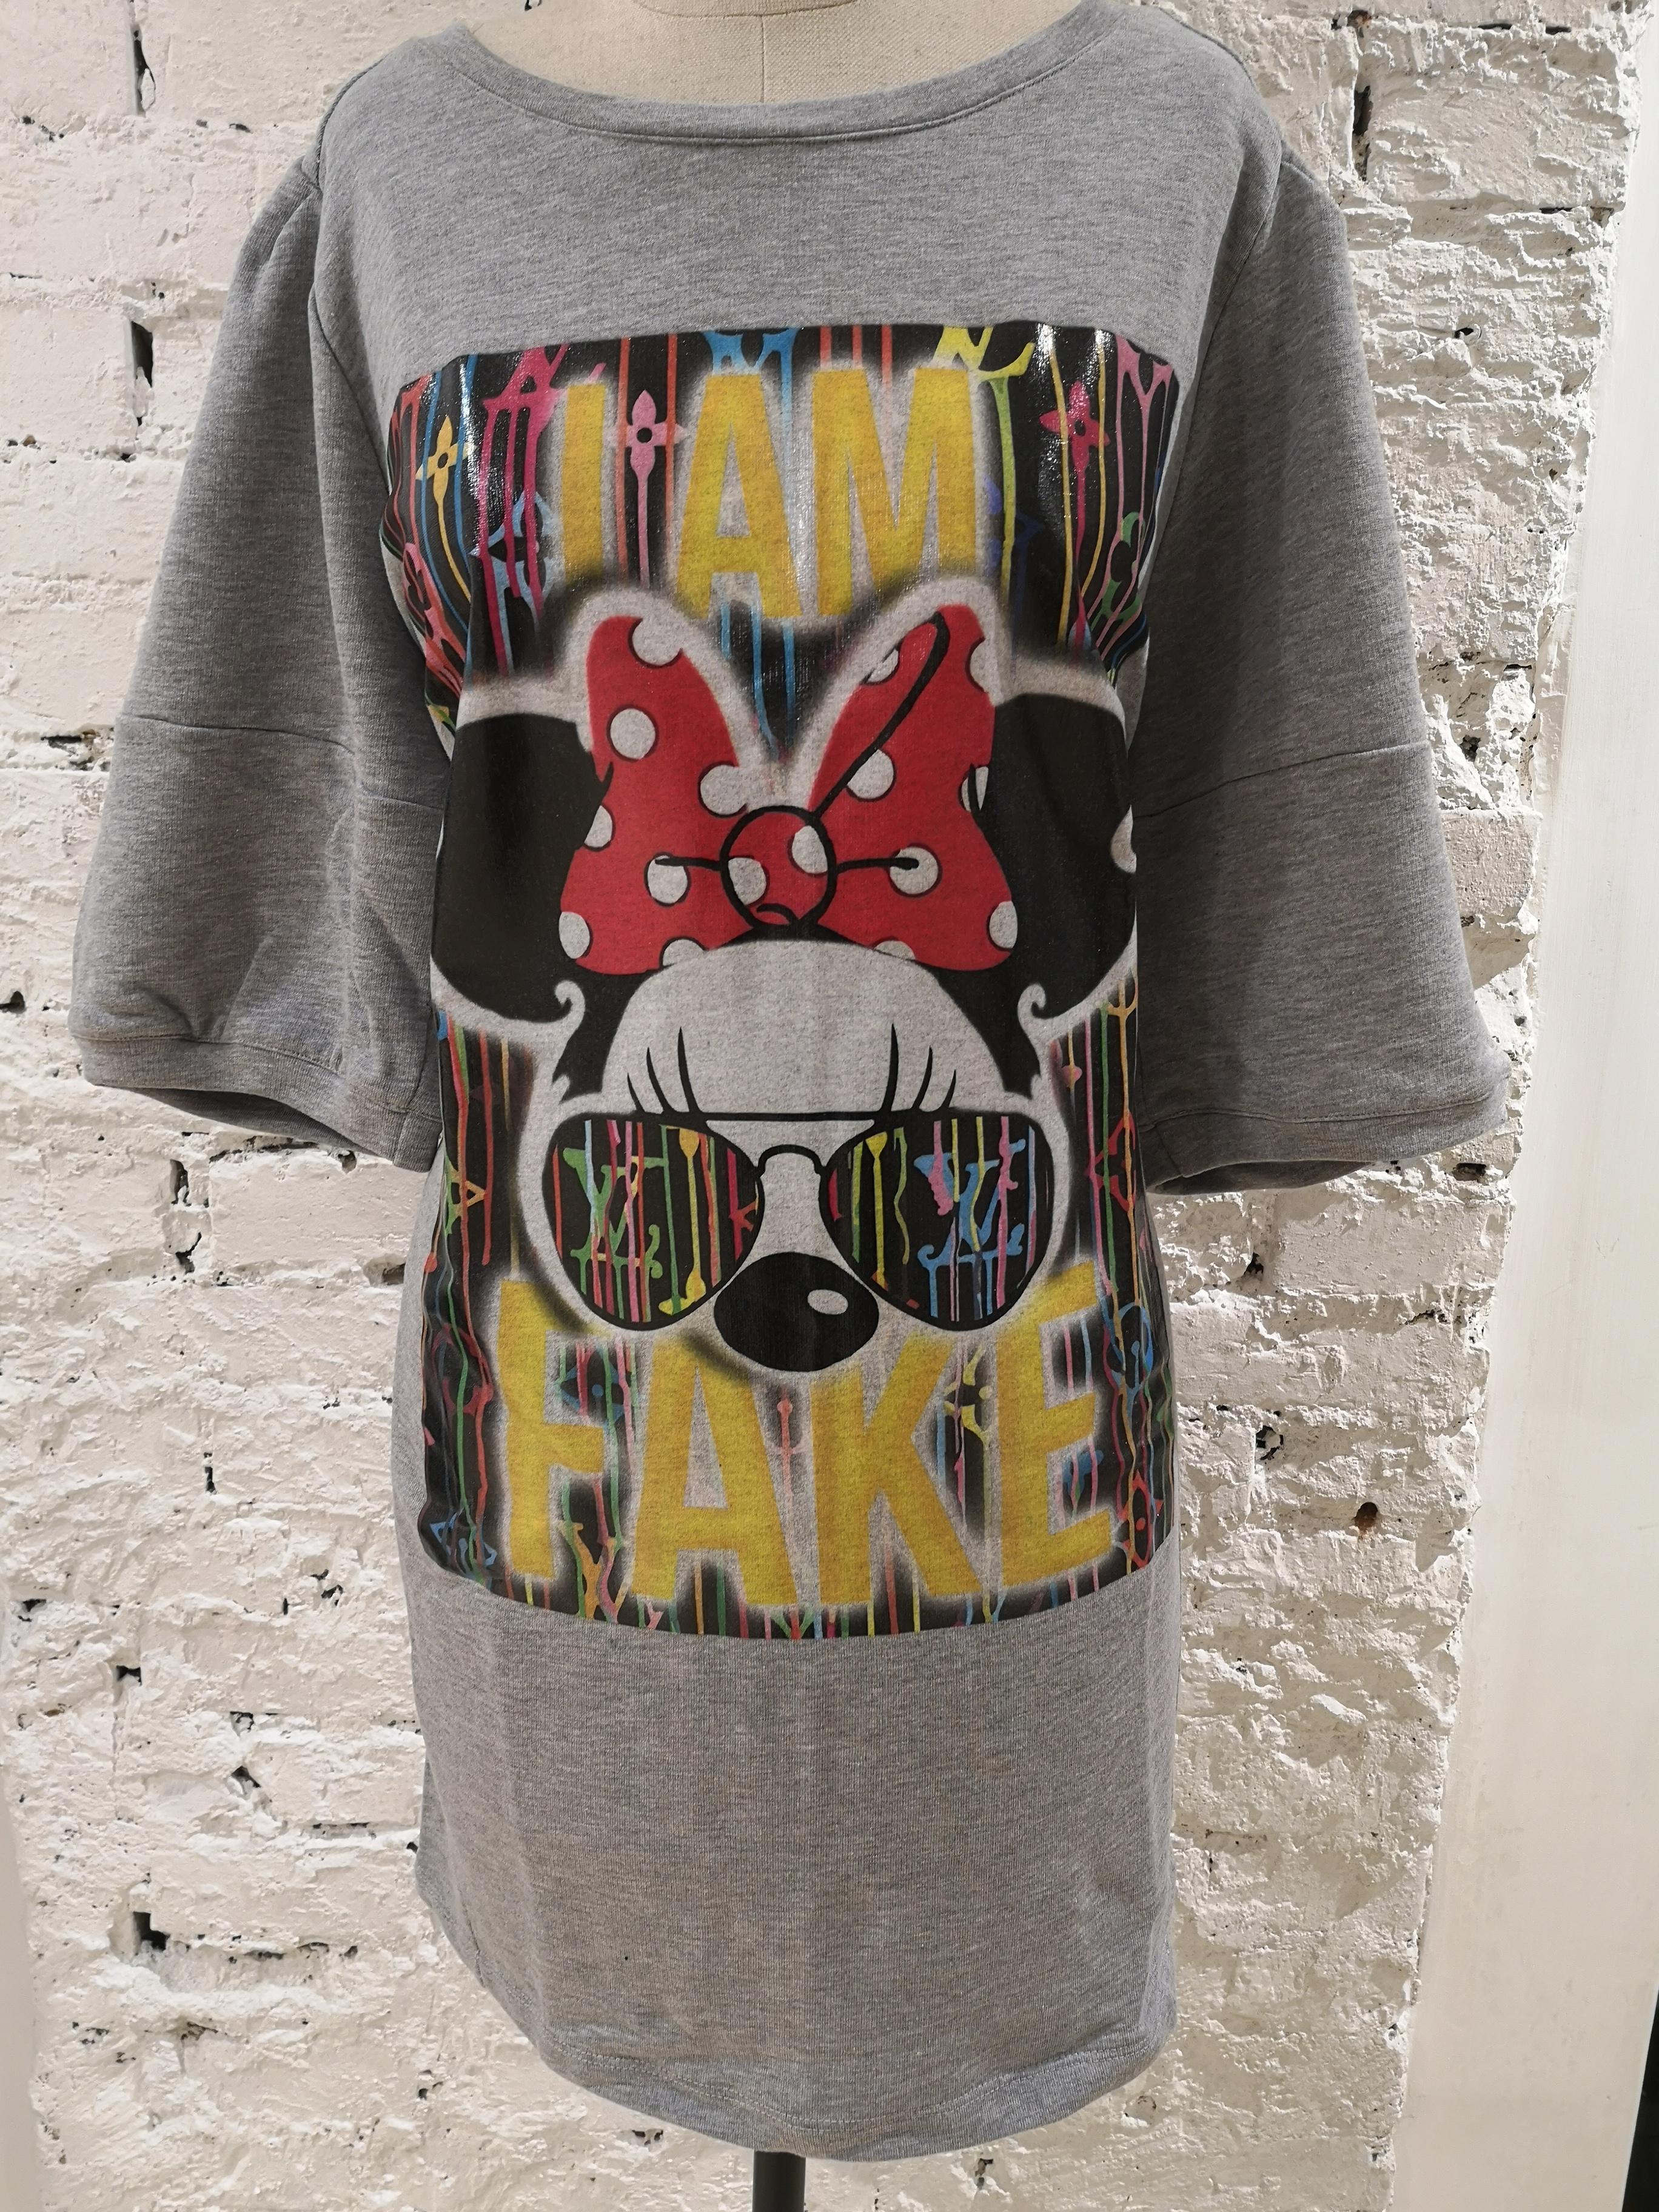 Gli Psicopatici I am Fake Minnie cotton long dress / sweater
totally made in italy
one size